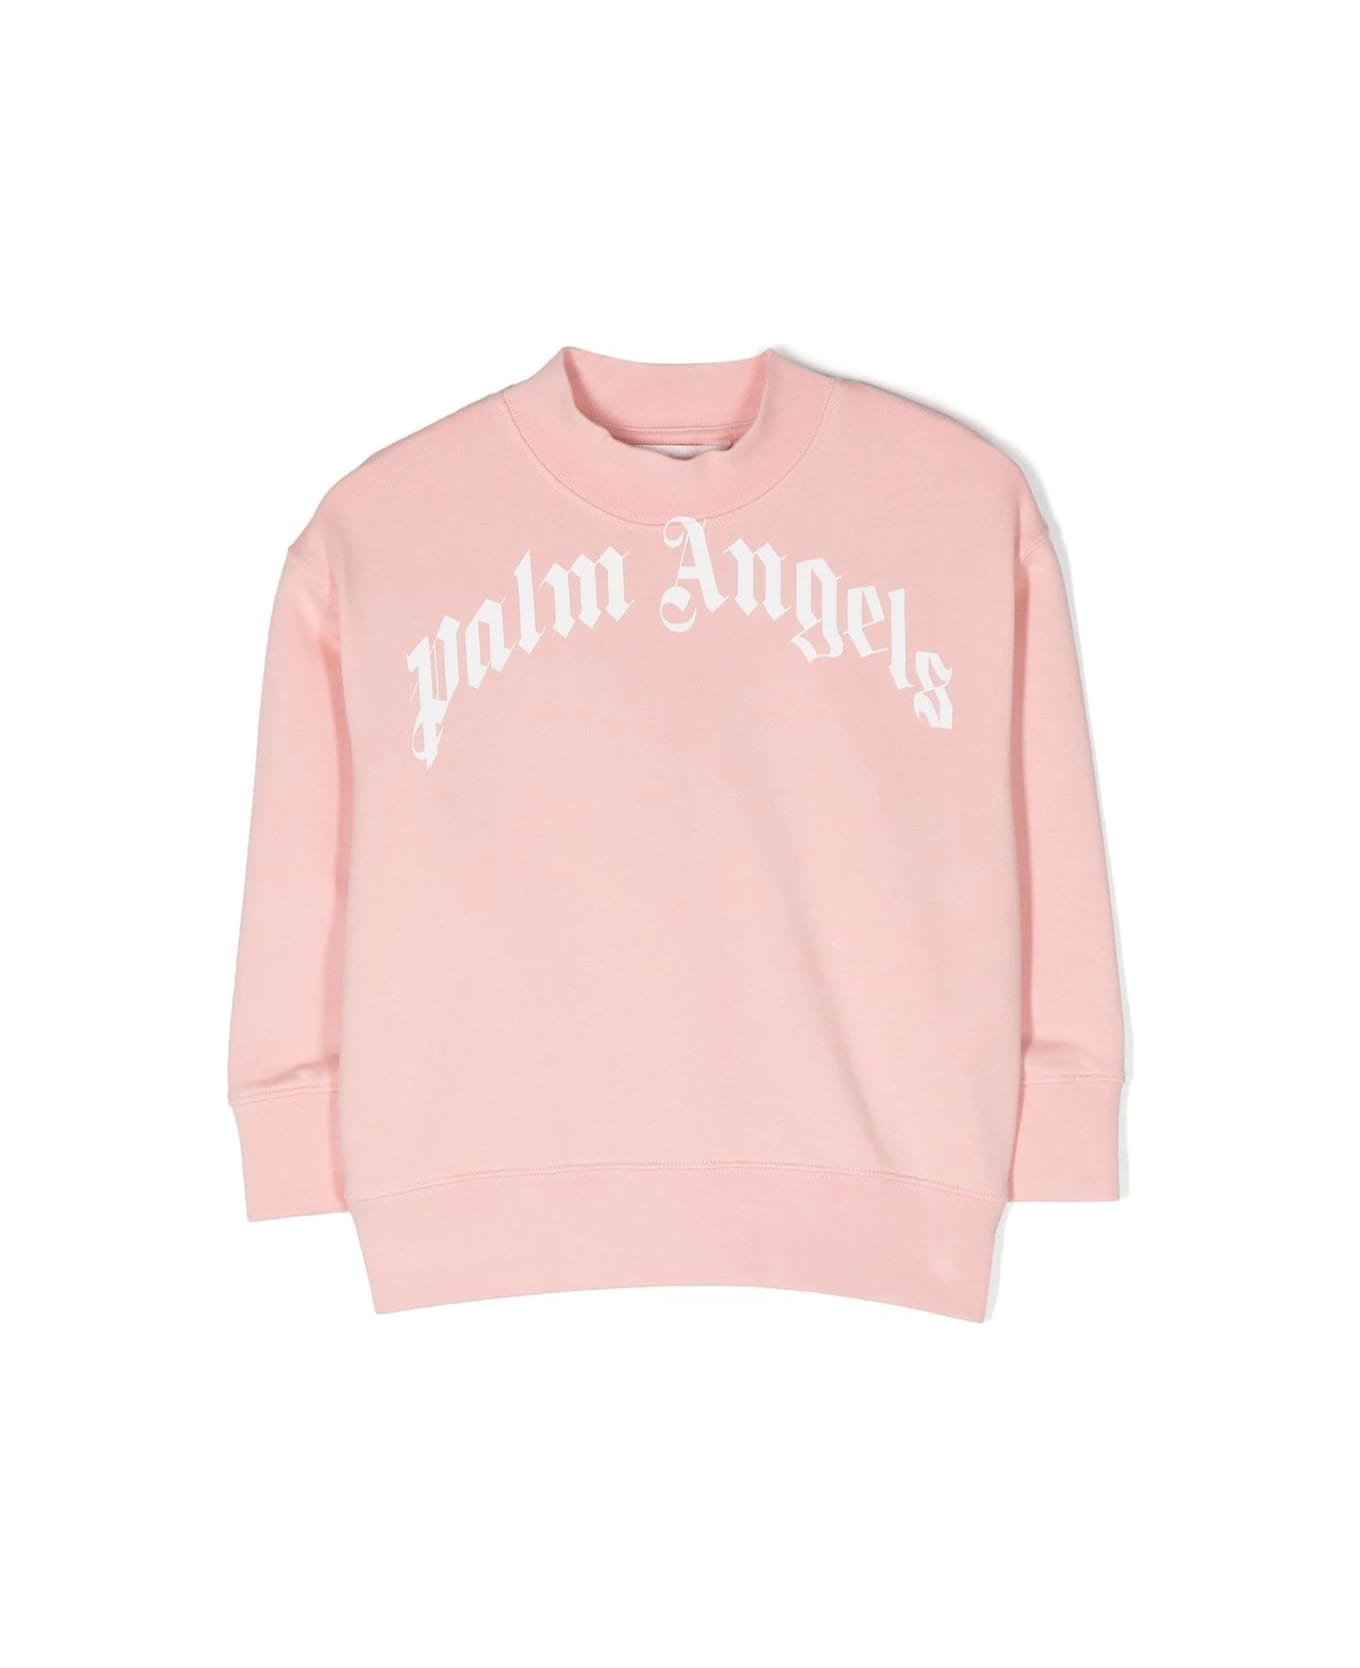 Palm Angels Pink Crew Neck Sweatshirt With Curved Logo - Pink